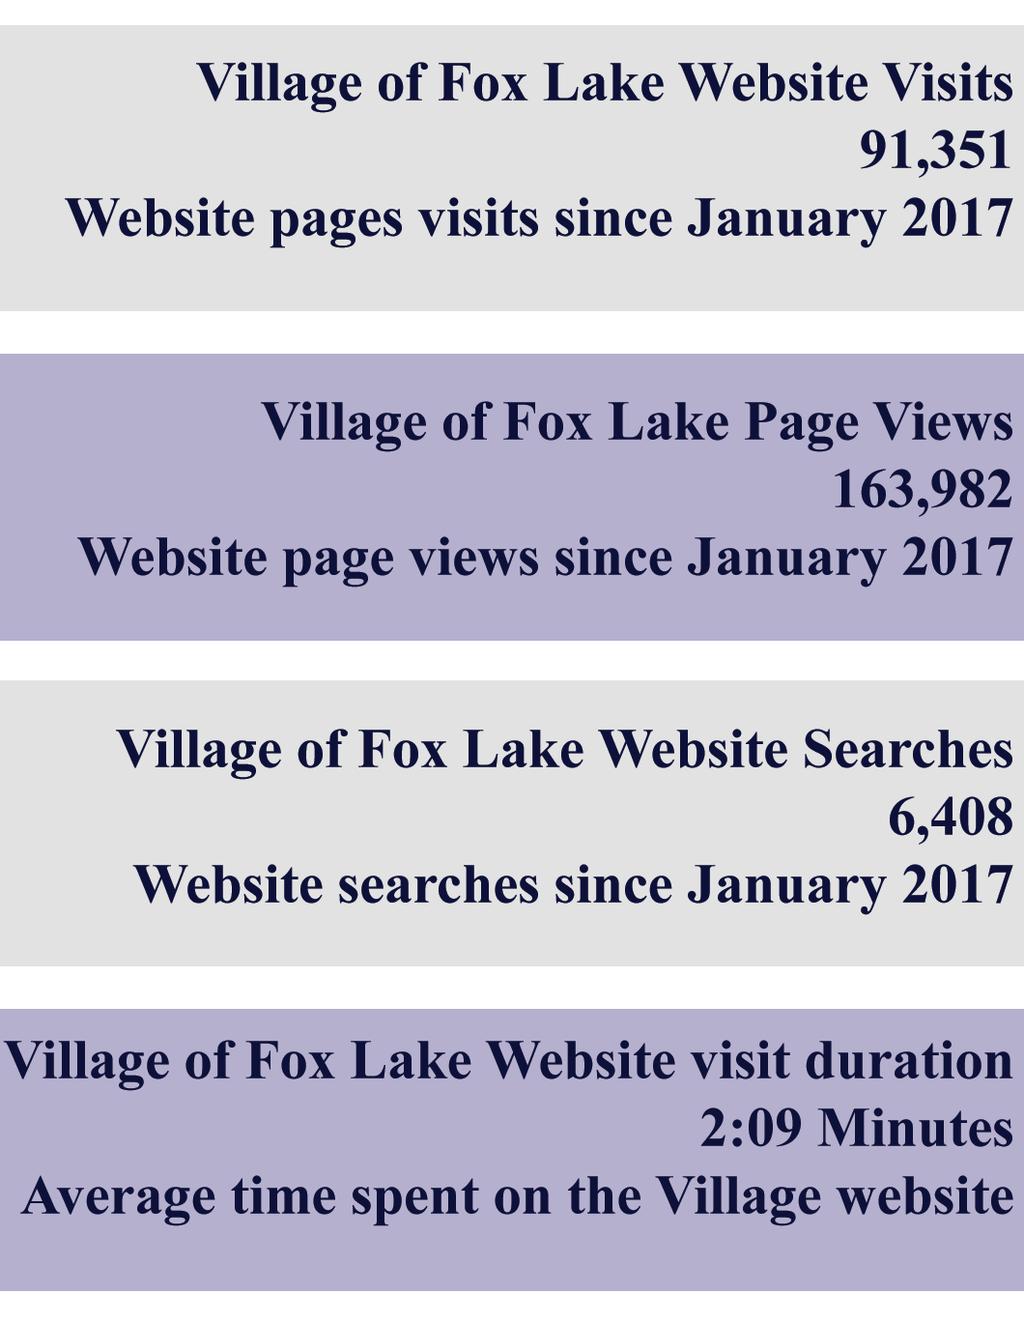 WEBSITE The Village of Fox Lake utilizes the Village of Fox Lake Website - www.foxlake.